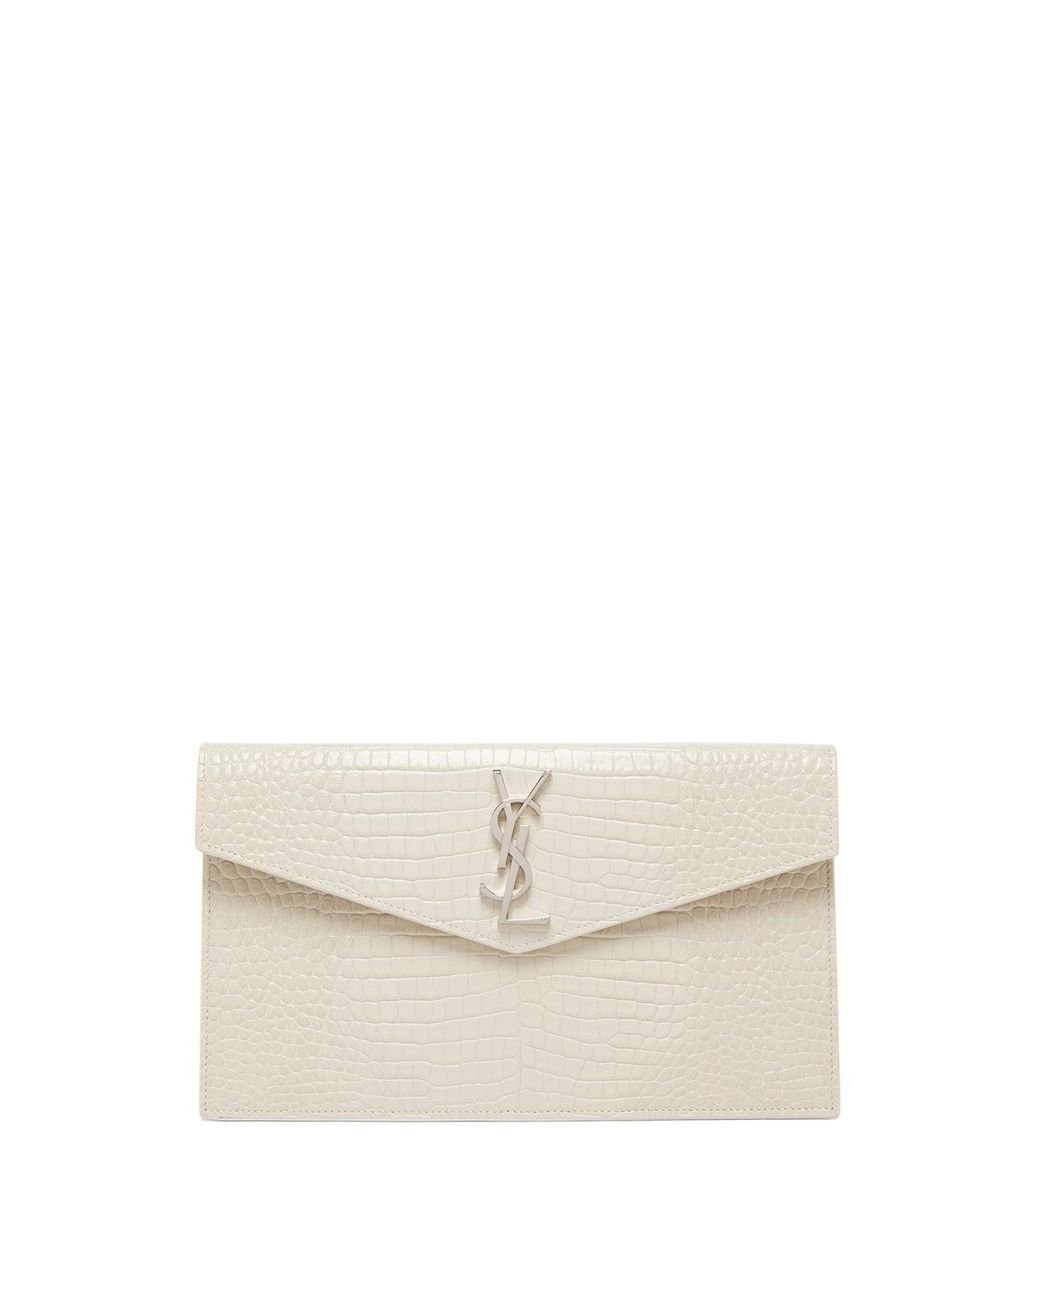 Uptown leather crossbody bag Saint Laurent White in Leather - 33383498